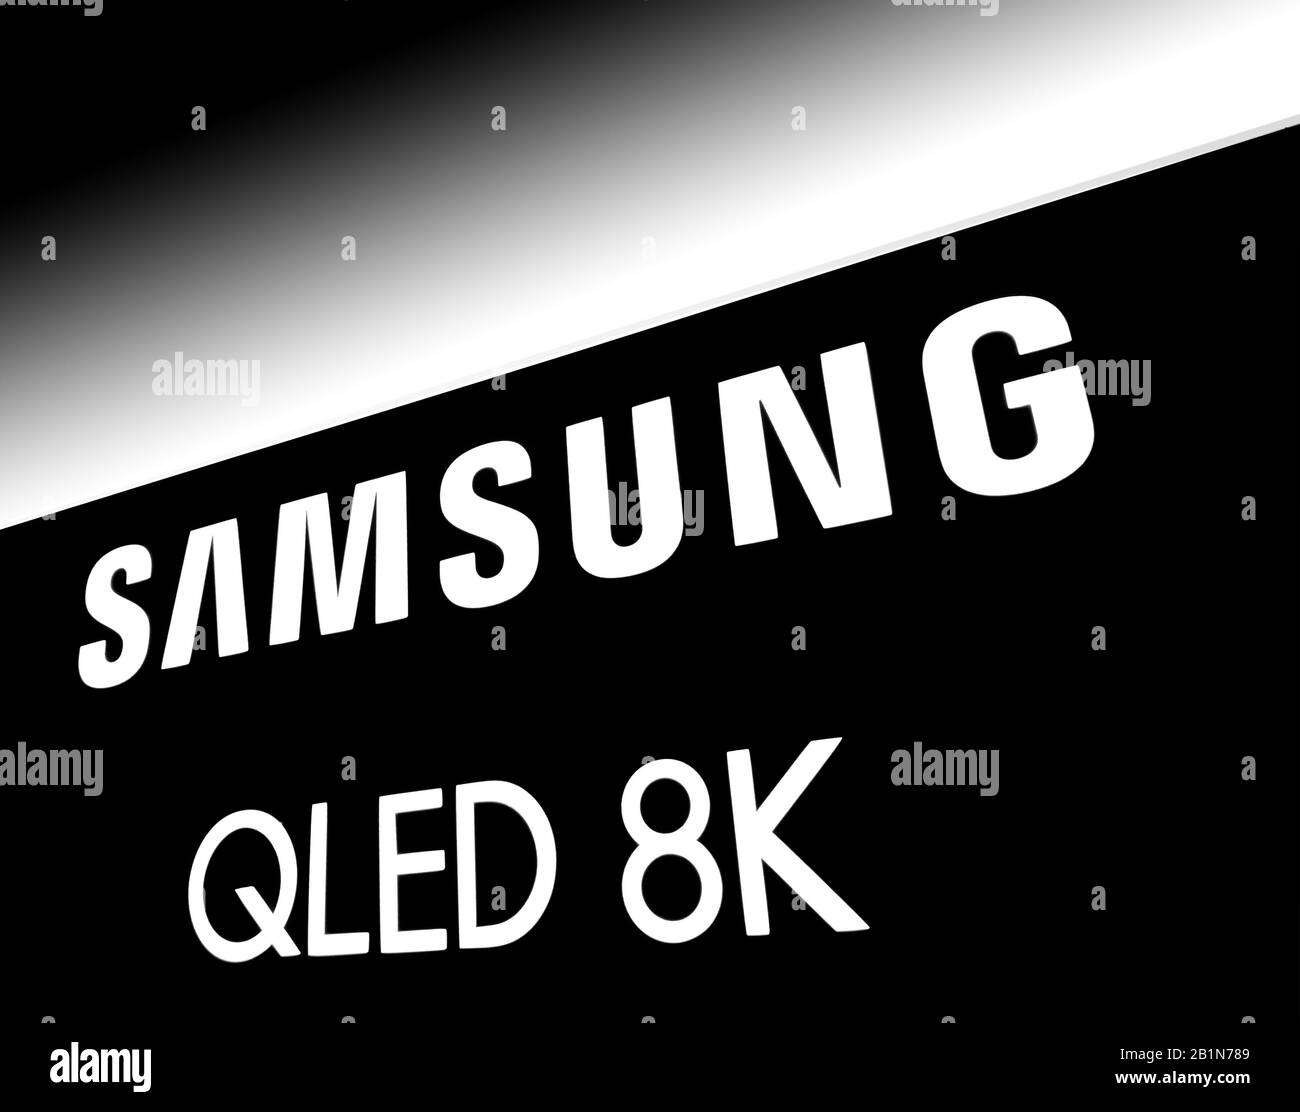 Samsung QLED 8k, contrasted logotype from Expo Stock Photo